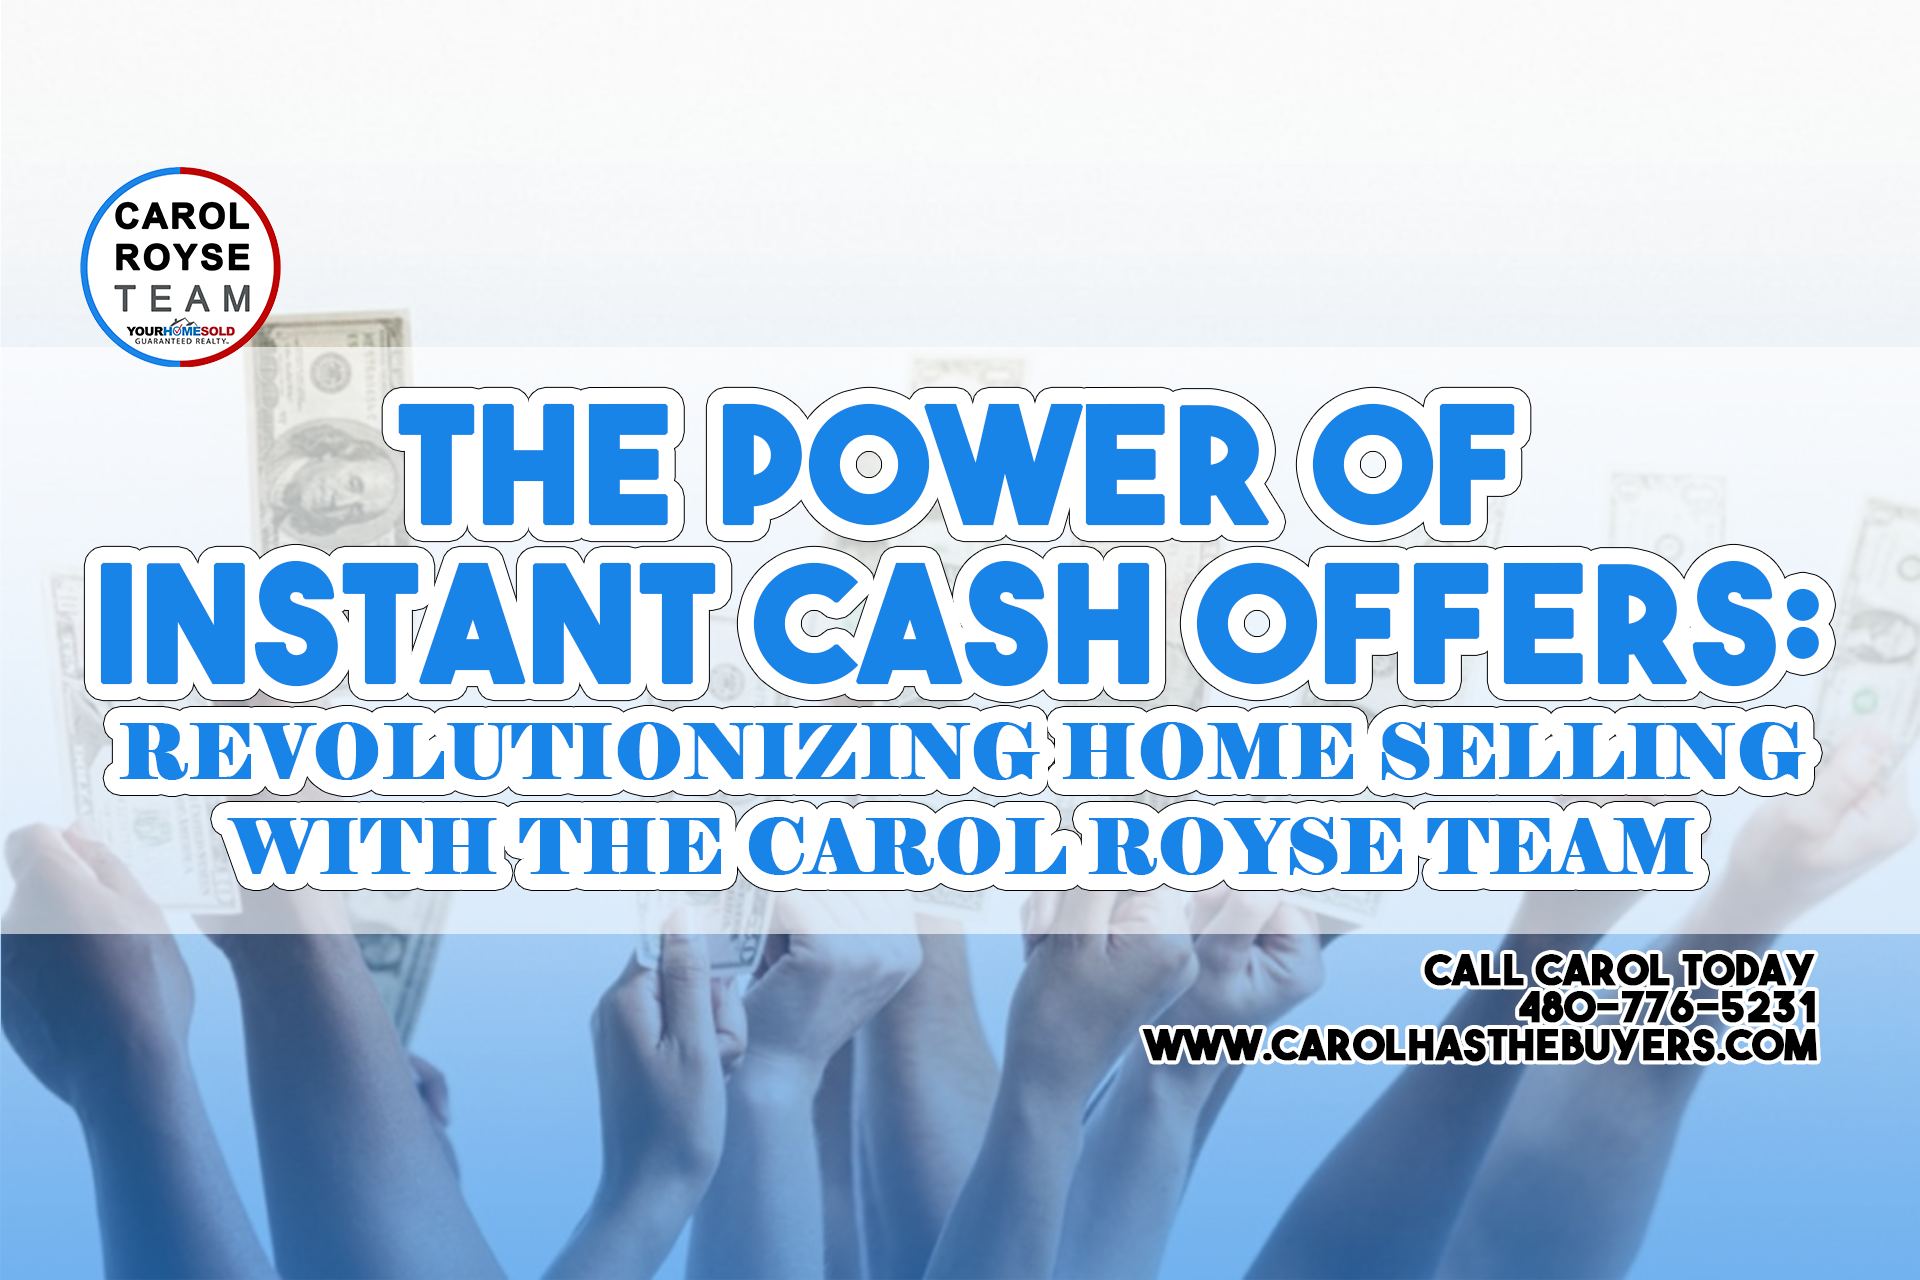 The Power of Instant Cash Offers: Revolutionizing Home Selling with the Carol Royse Team